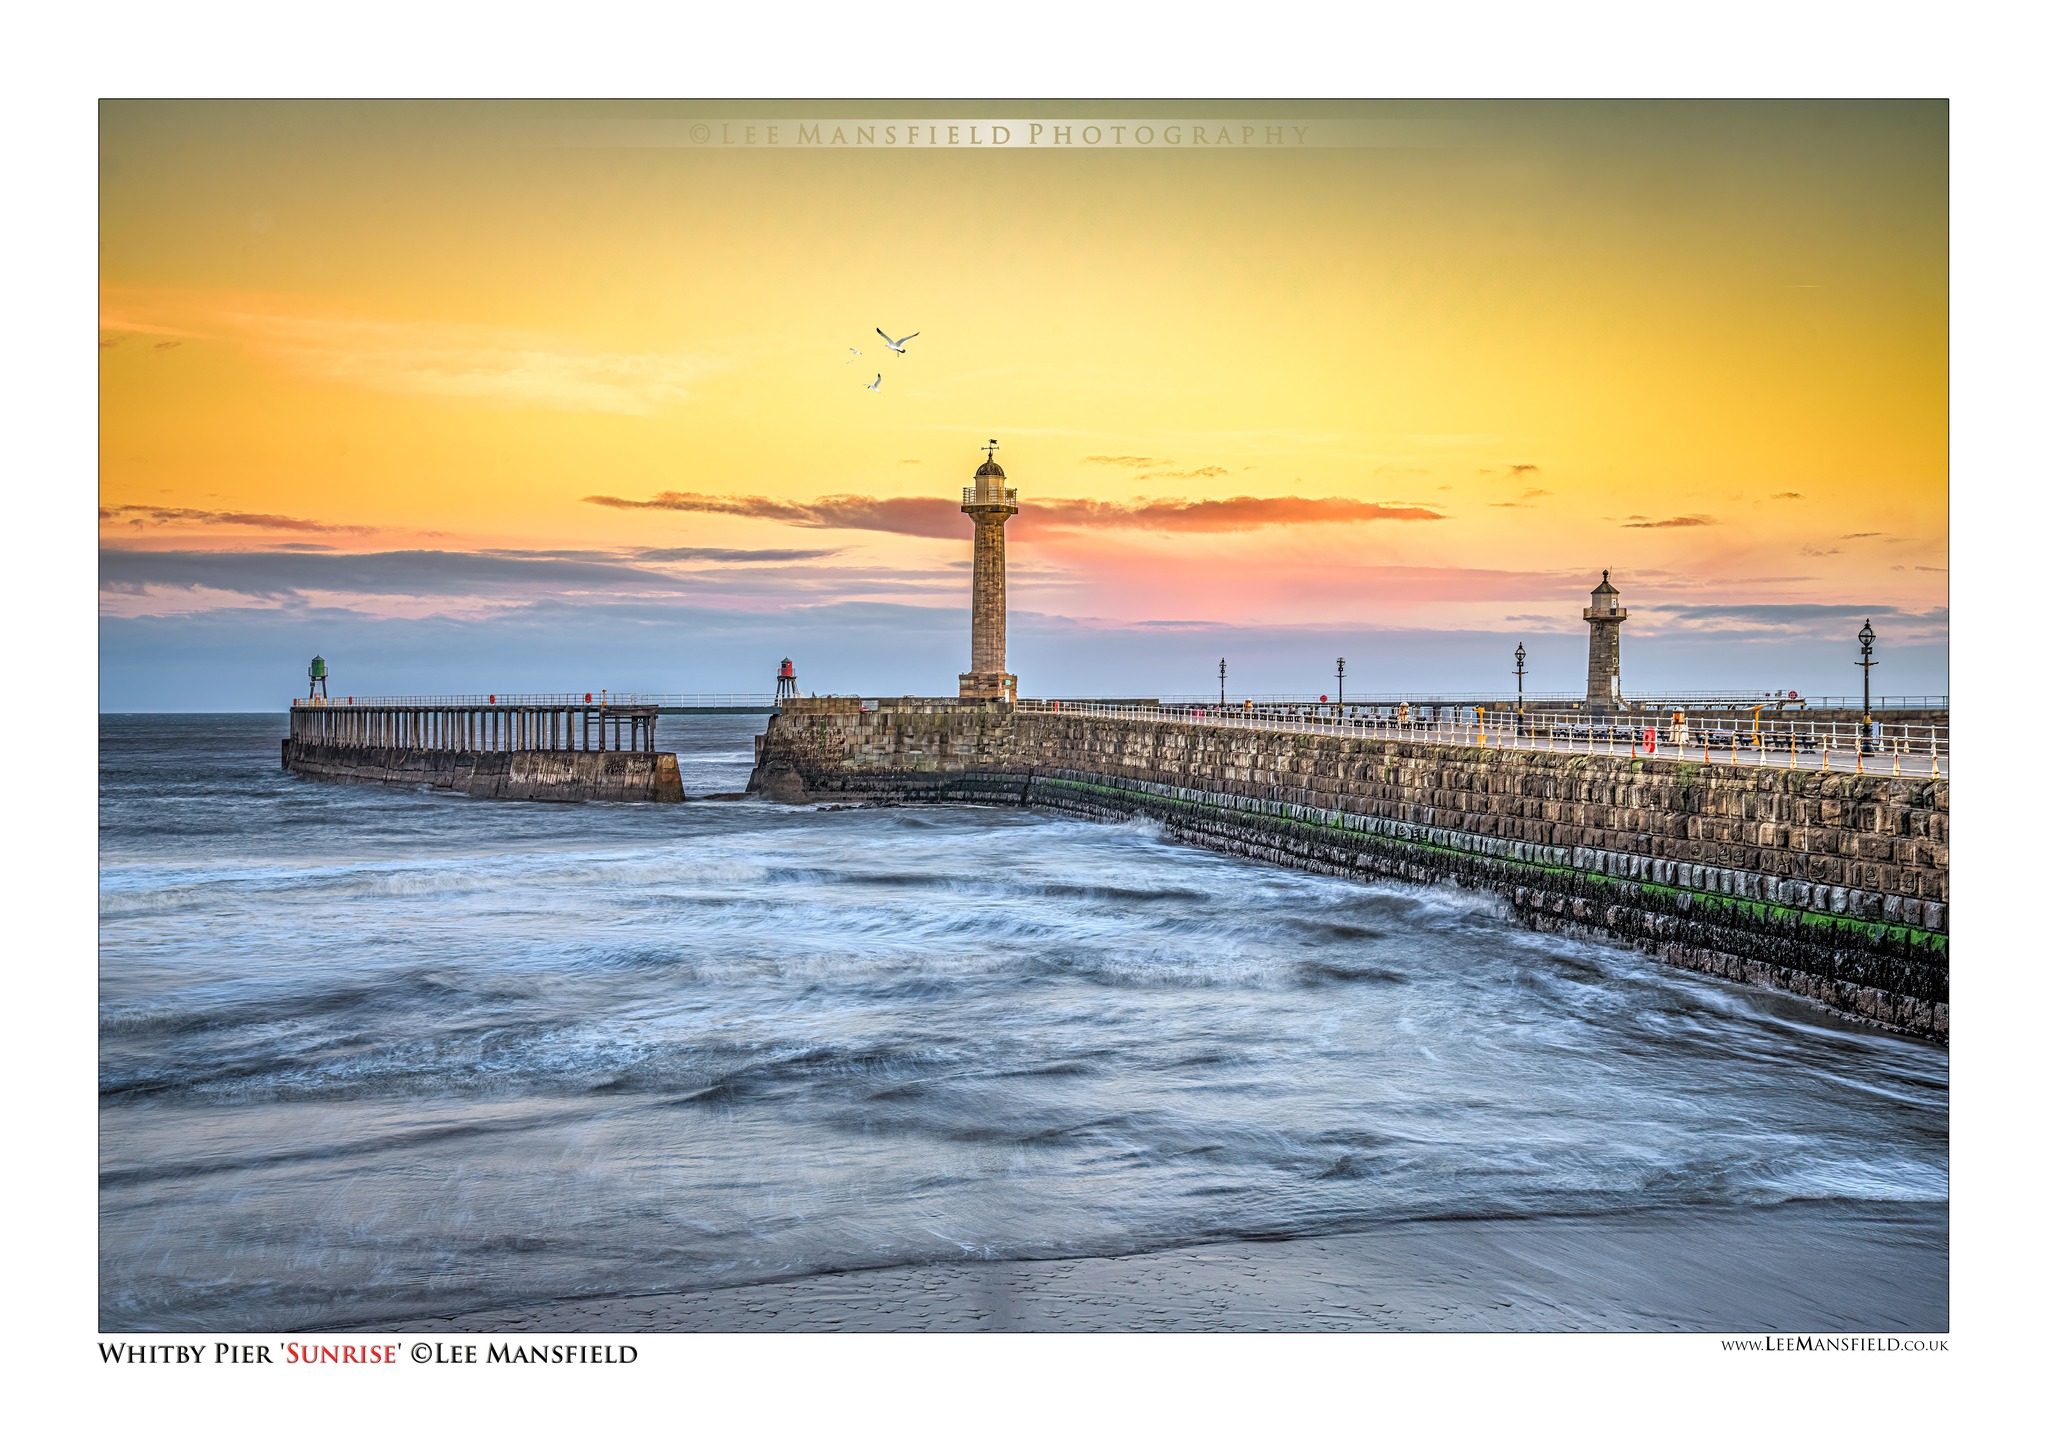 Sunrise at Whitby Pier - Lee Mansfield